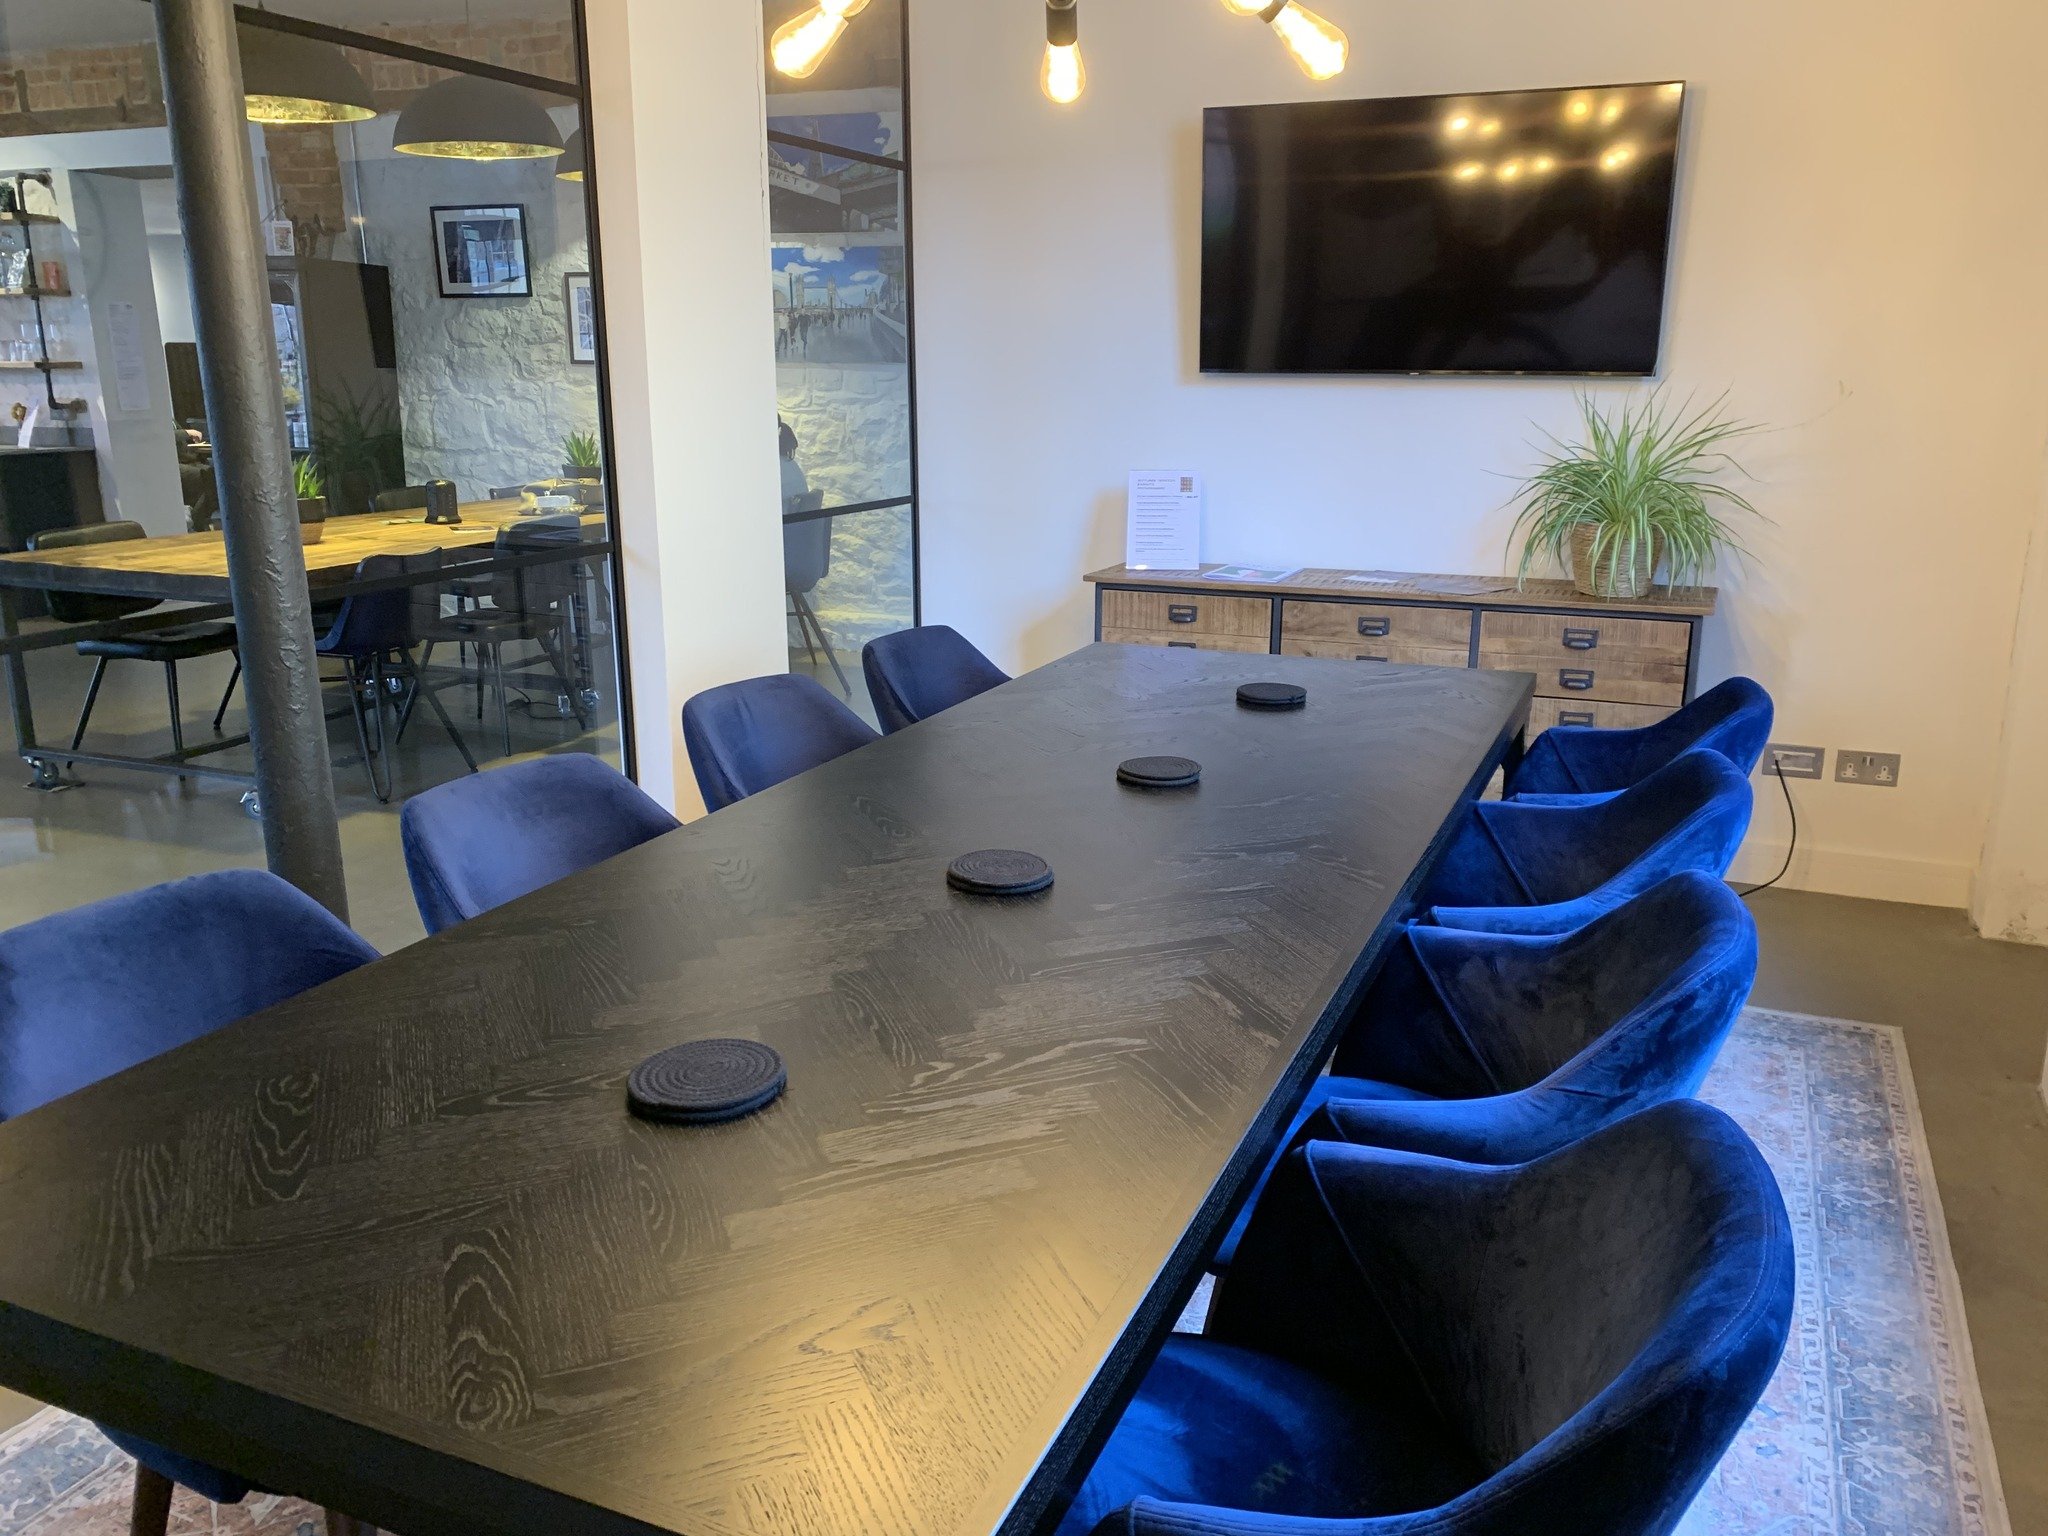 Looking for a special place to impress clients, host a presentation or have a team meeting?  Our eight seater boardroom is the perfect venue with super comfy chairs, a large screen and complimentary teas and coffees. 

Bookable by the hour for &pound